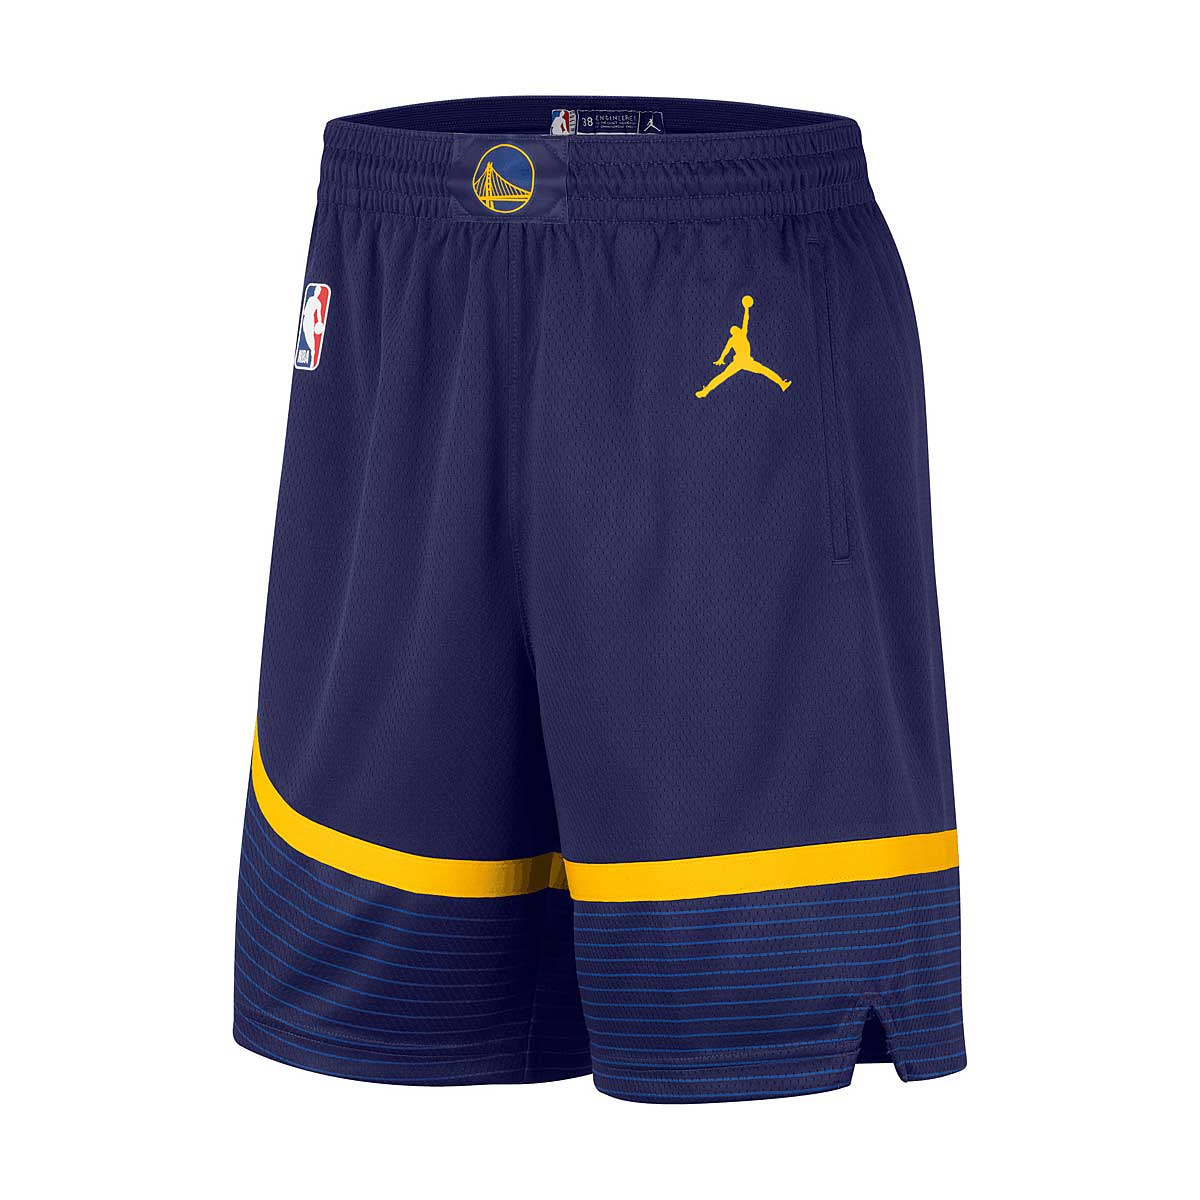 Buy NBA GOLDEN STATE WARRIORS DRI-FIT STATEMENT SWINGMAN SHORTS for N/A ...